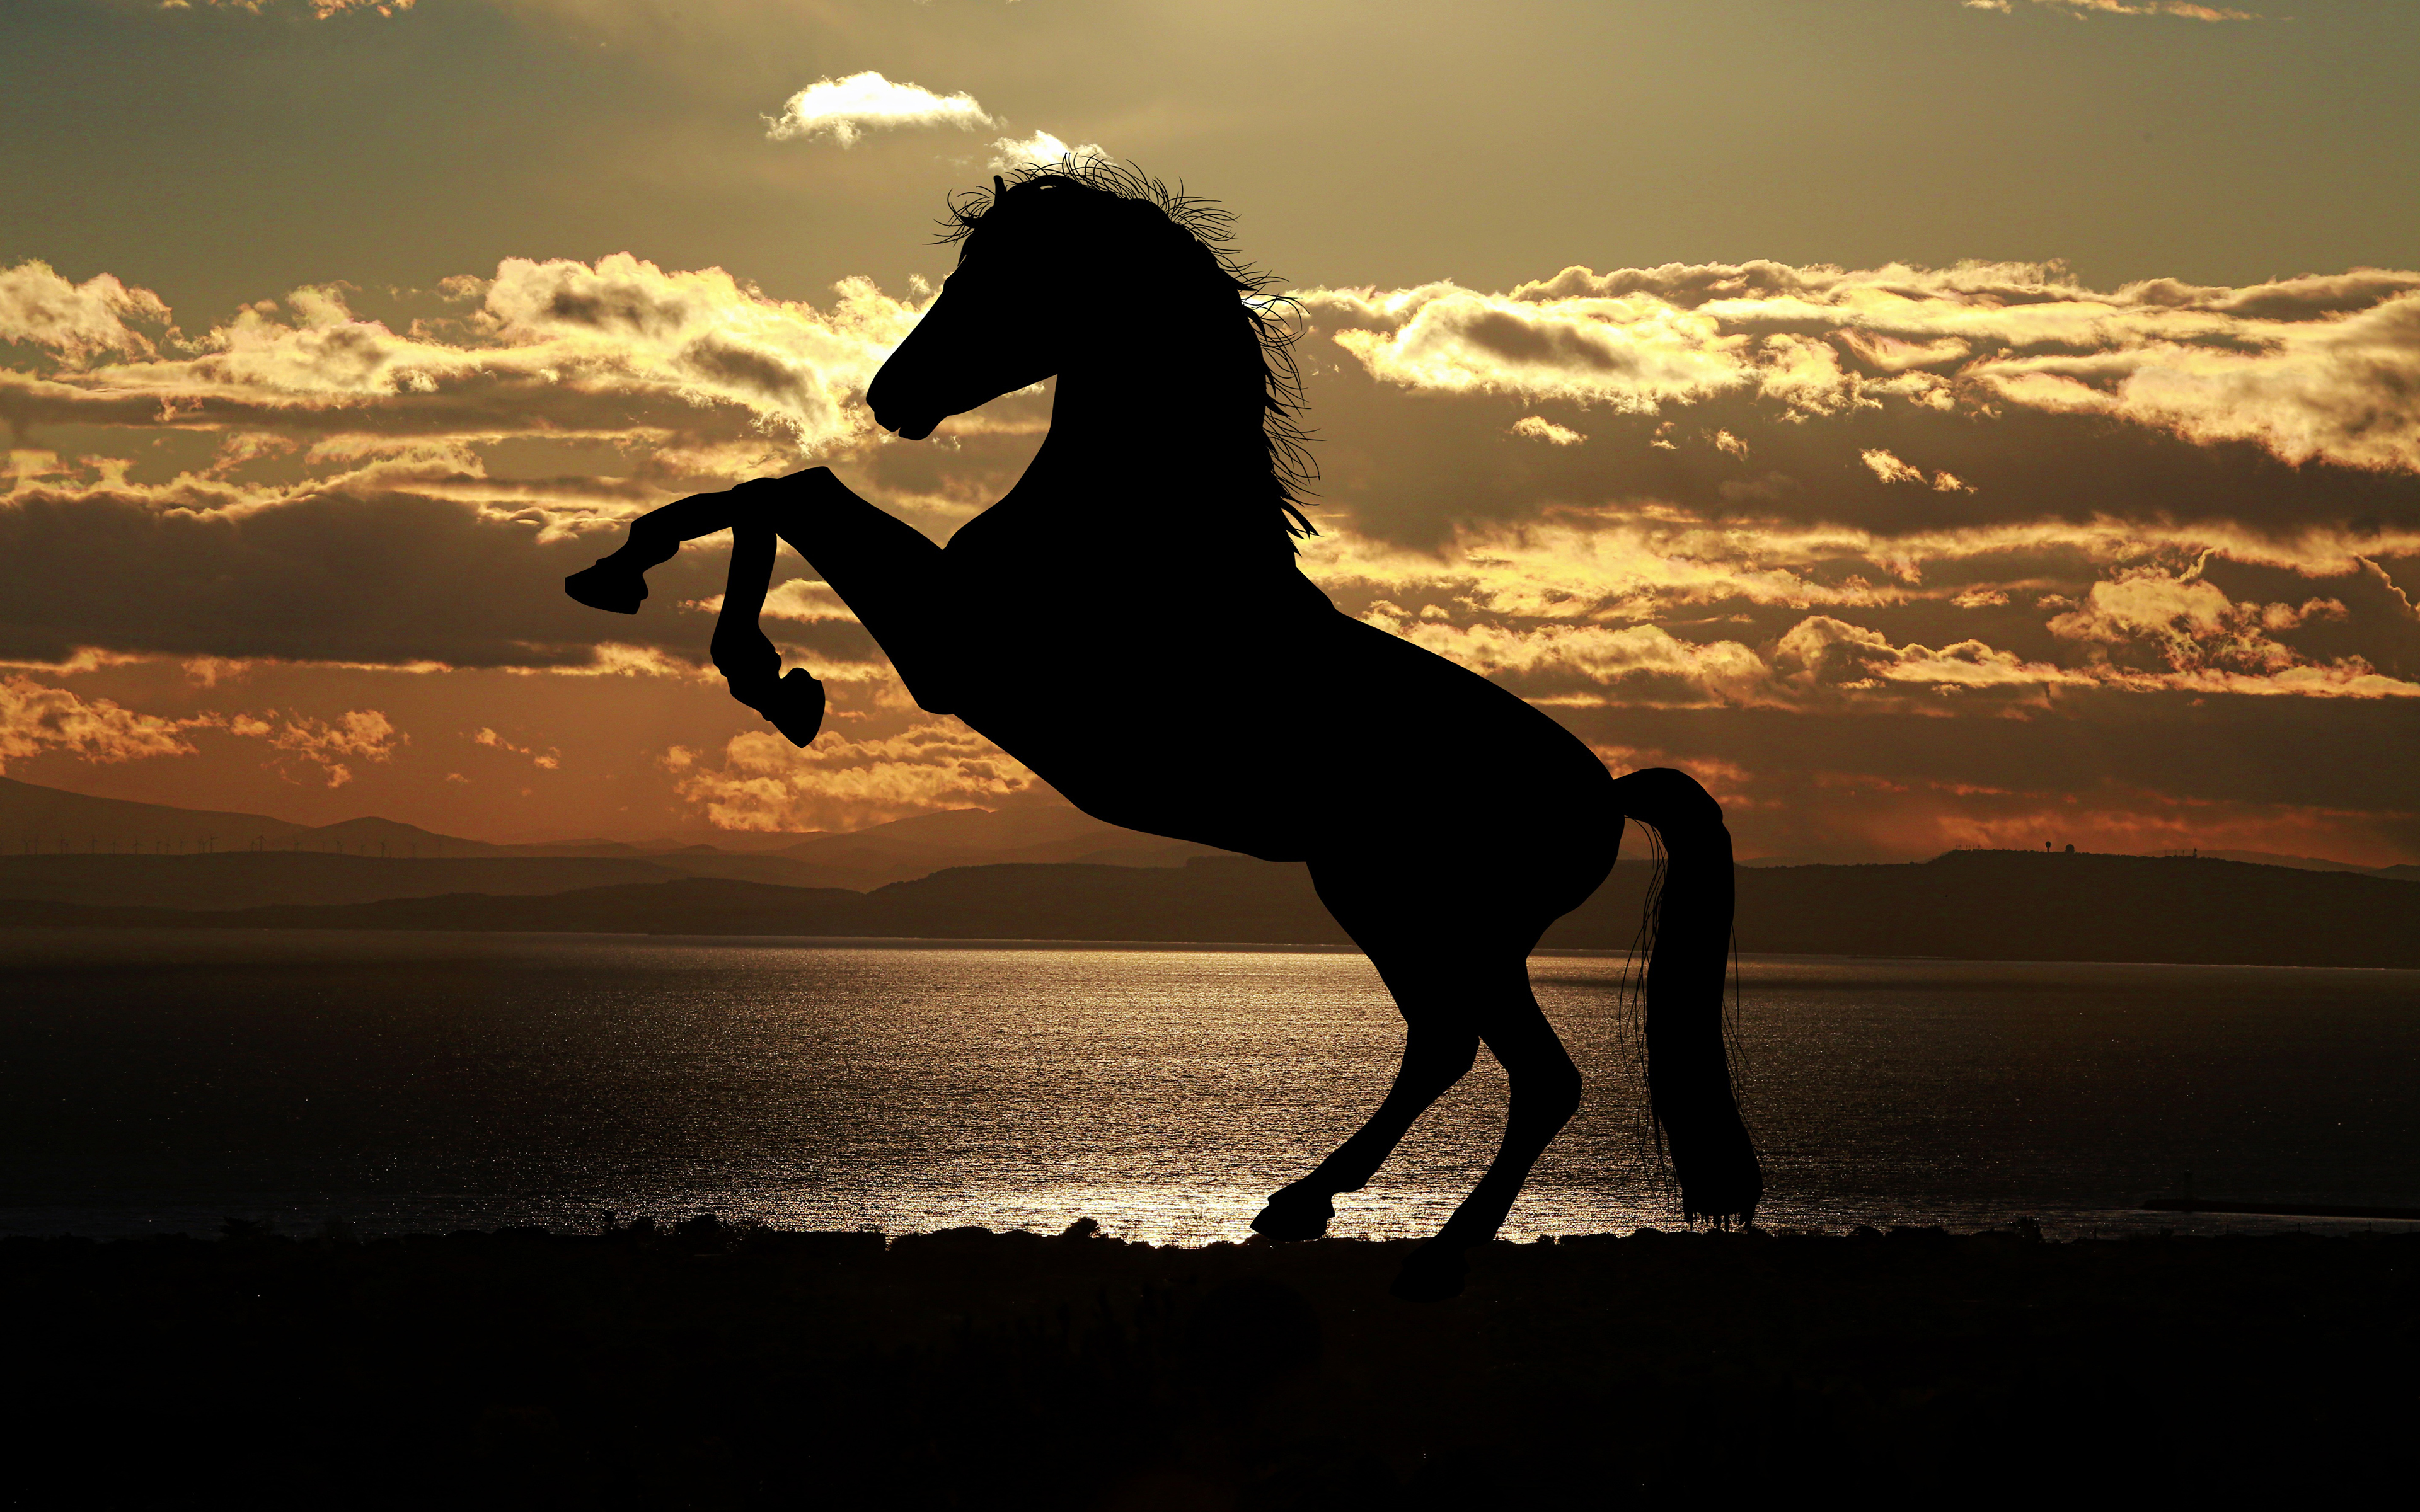 Horse Silhouette at Sunset 4K Wallpapers